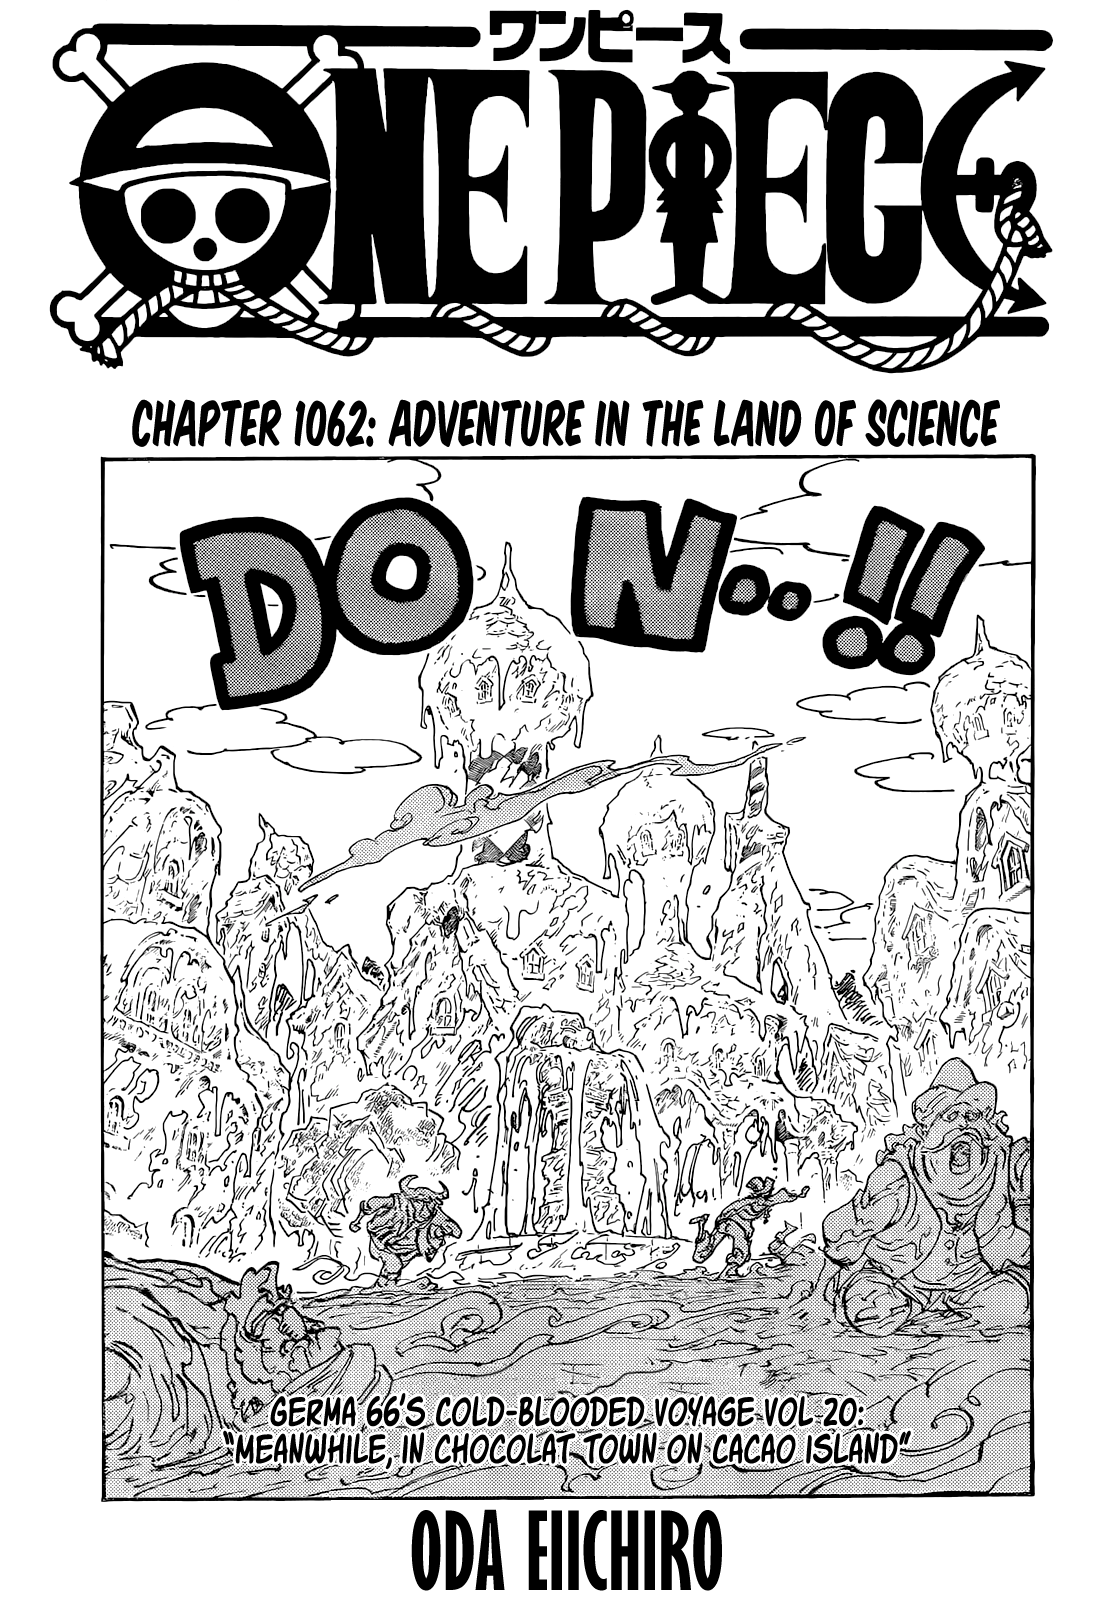 One Piece, Chapter 1062 | TcbScans Org - Free Manga Online in High 